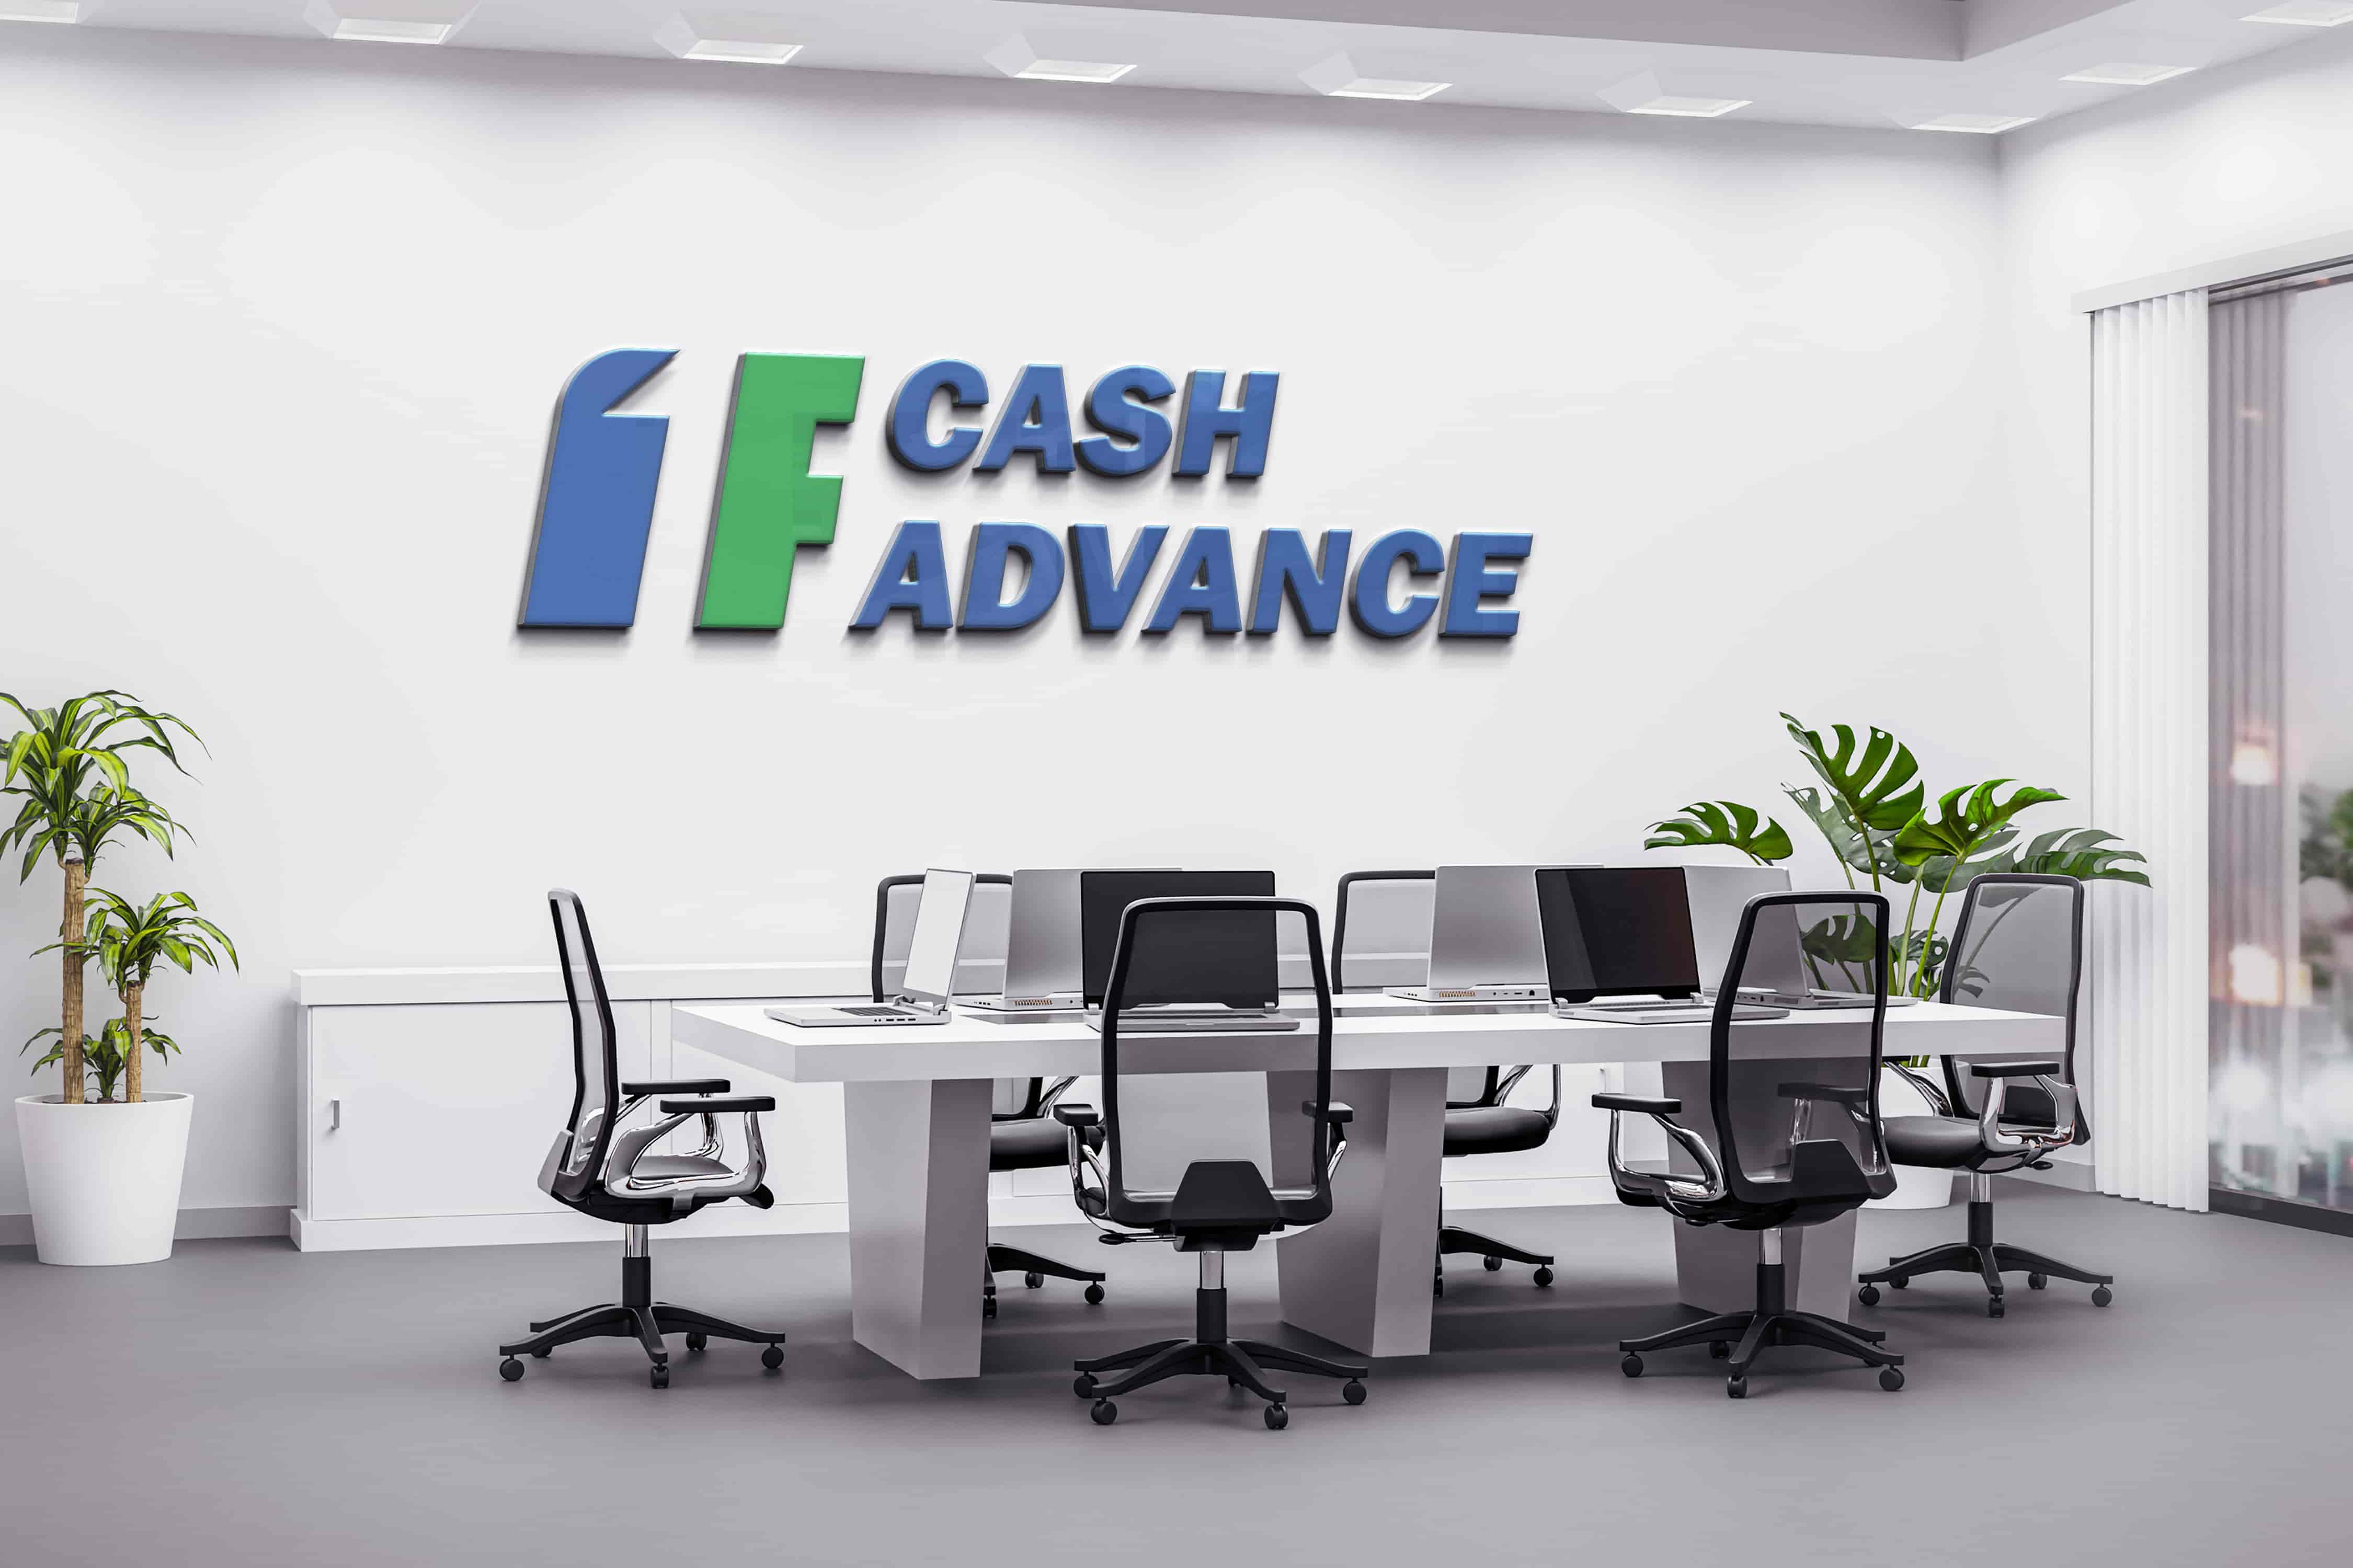 Cash advance in Pittsburgh, PA